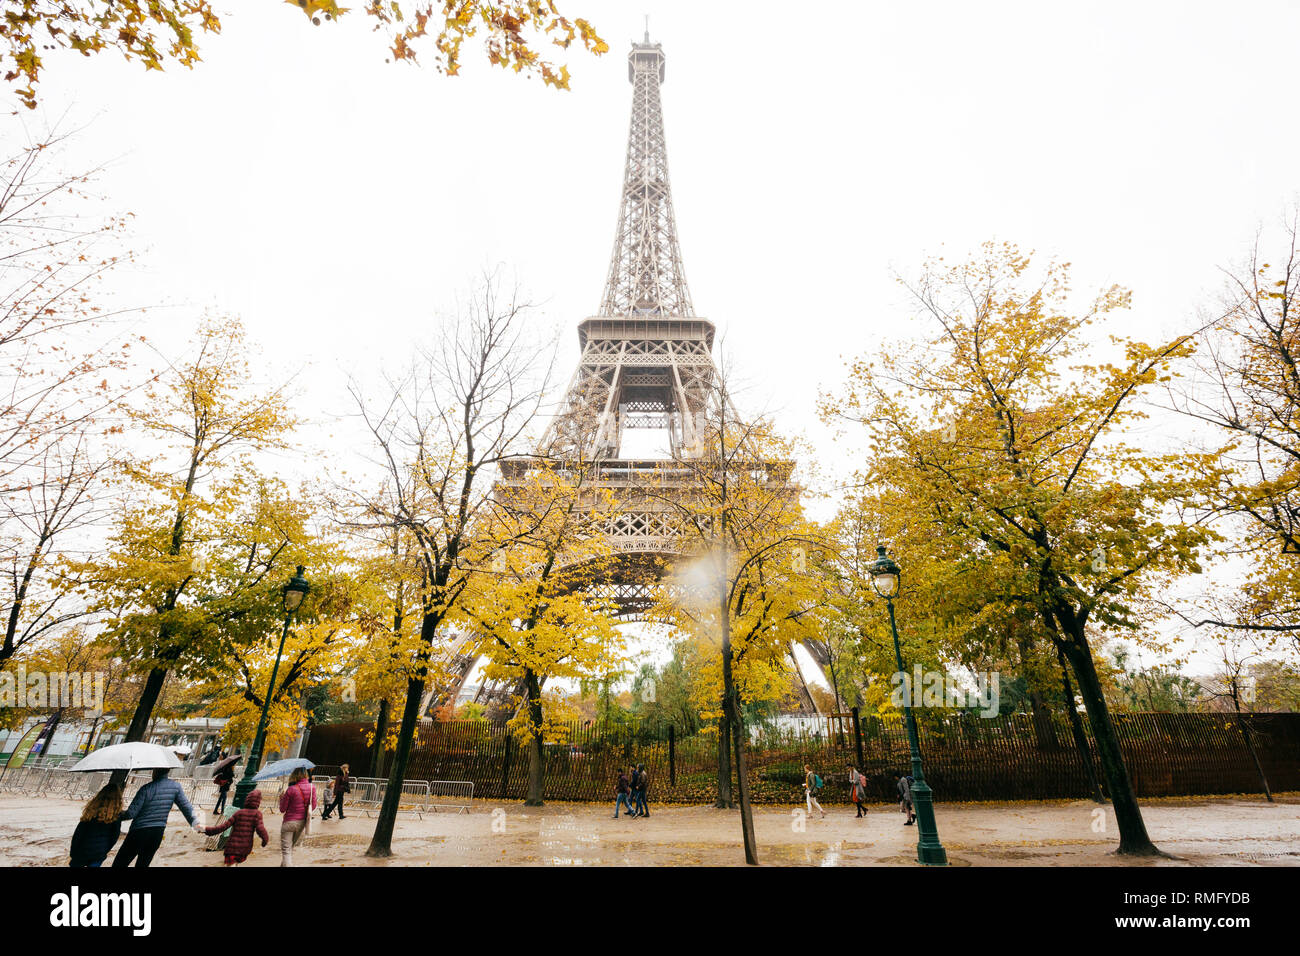 Paris (France) - Tour Eiffel in a rainy day and natural fall colors Stock Photo